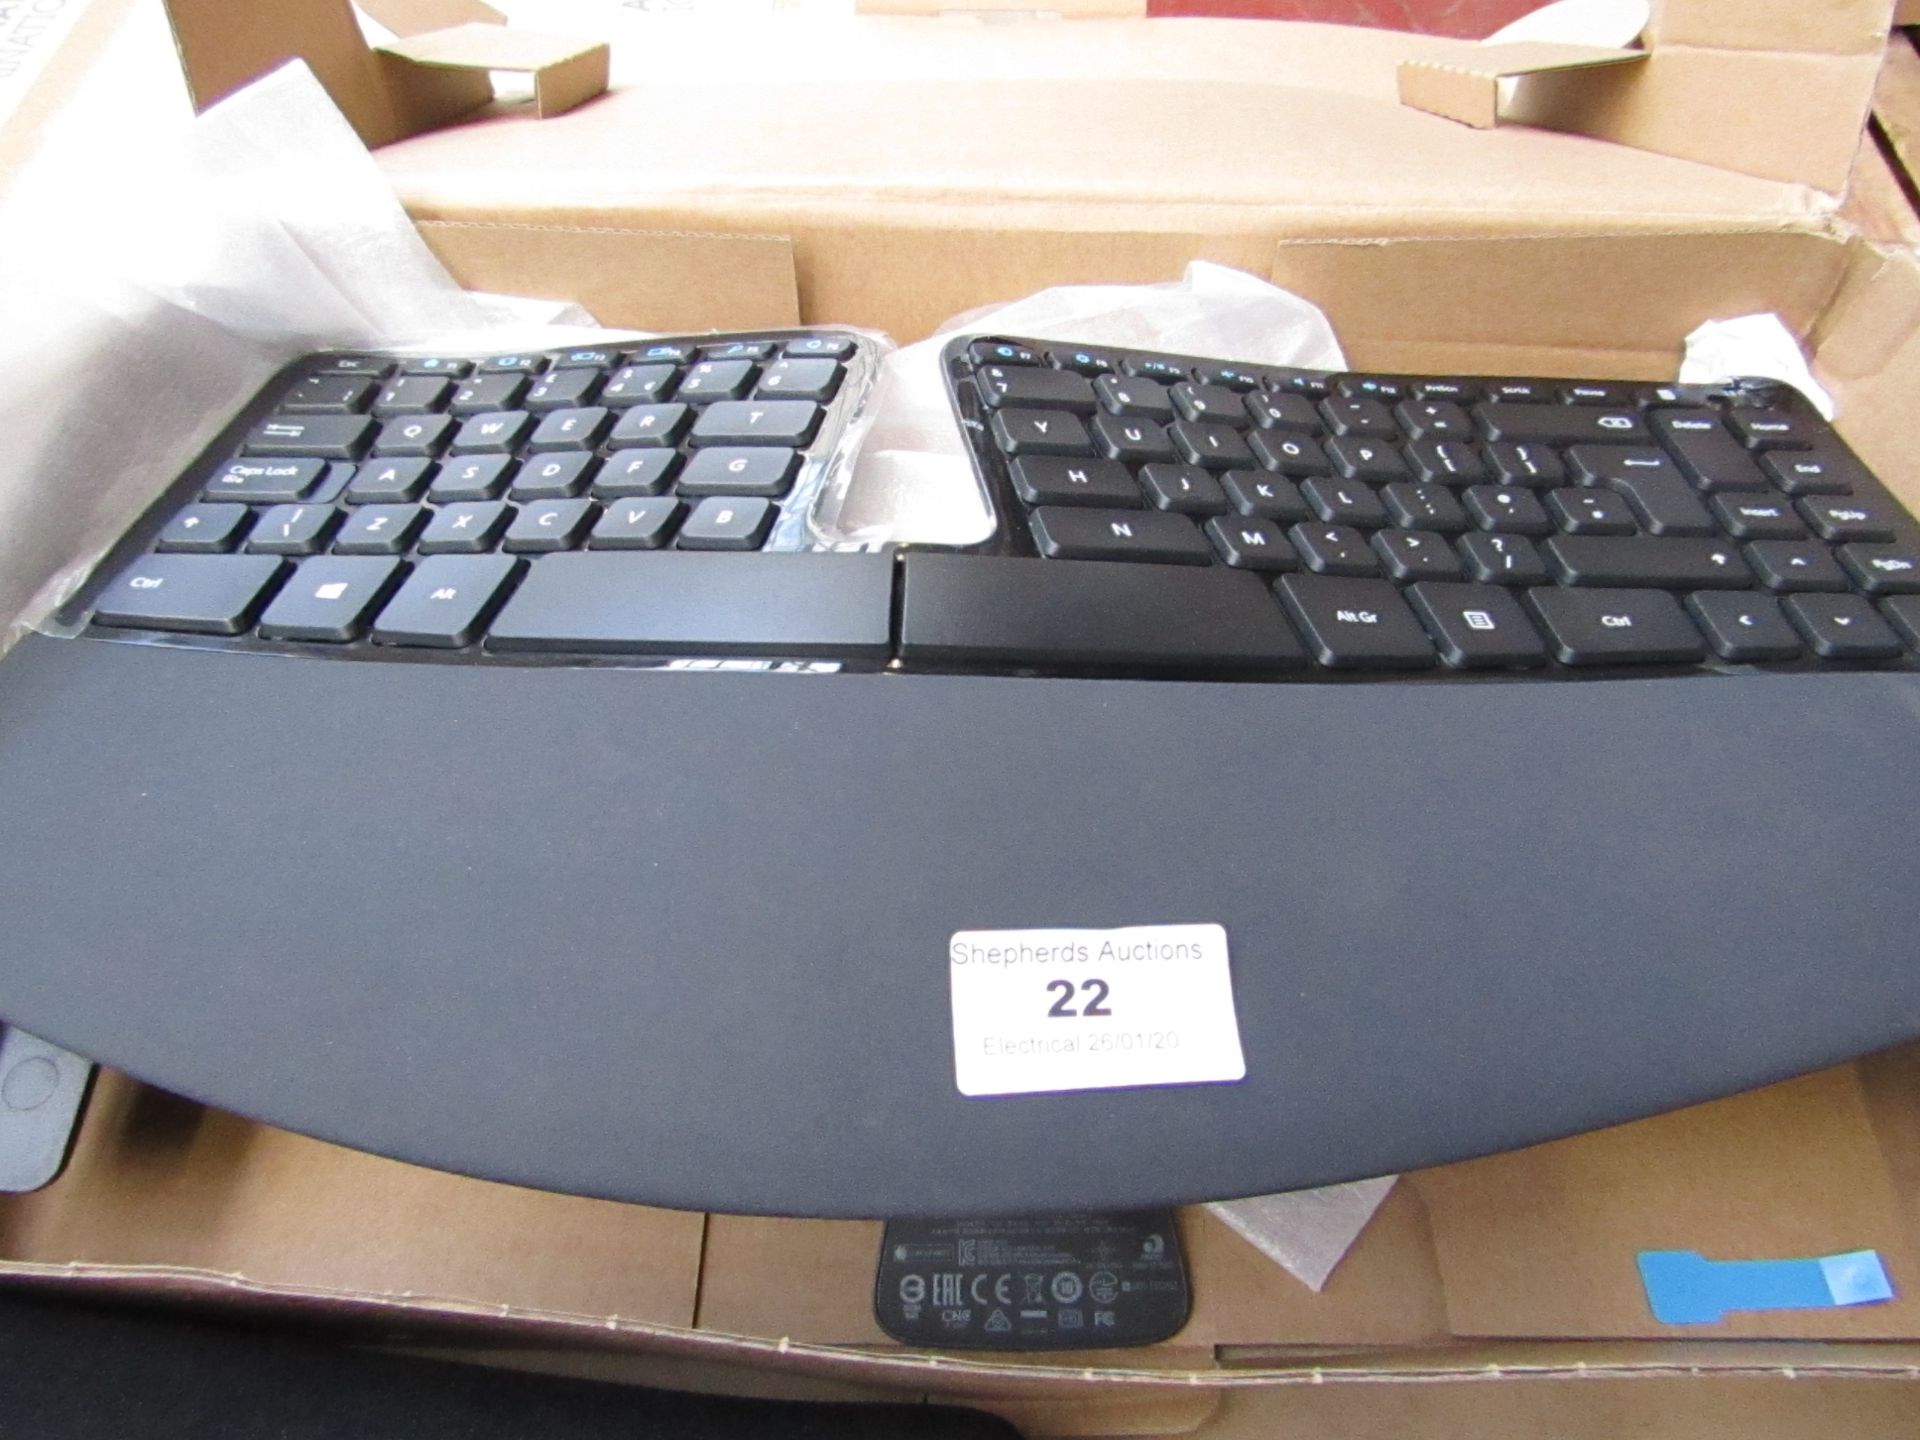 Microsoft comfort keyboard, untested and boxed.